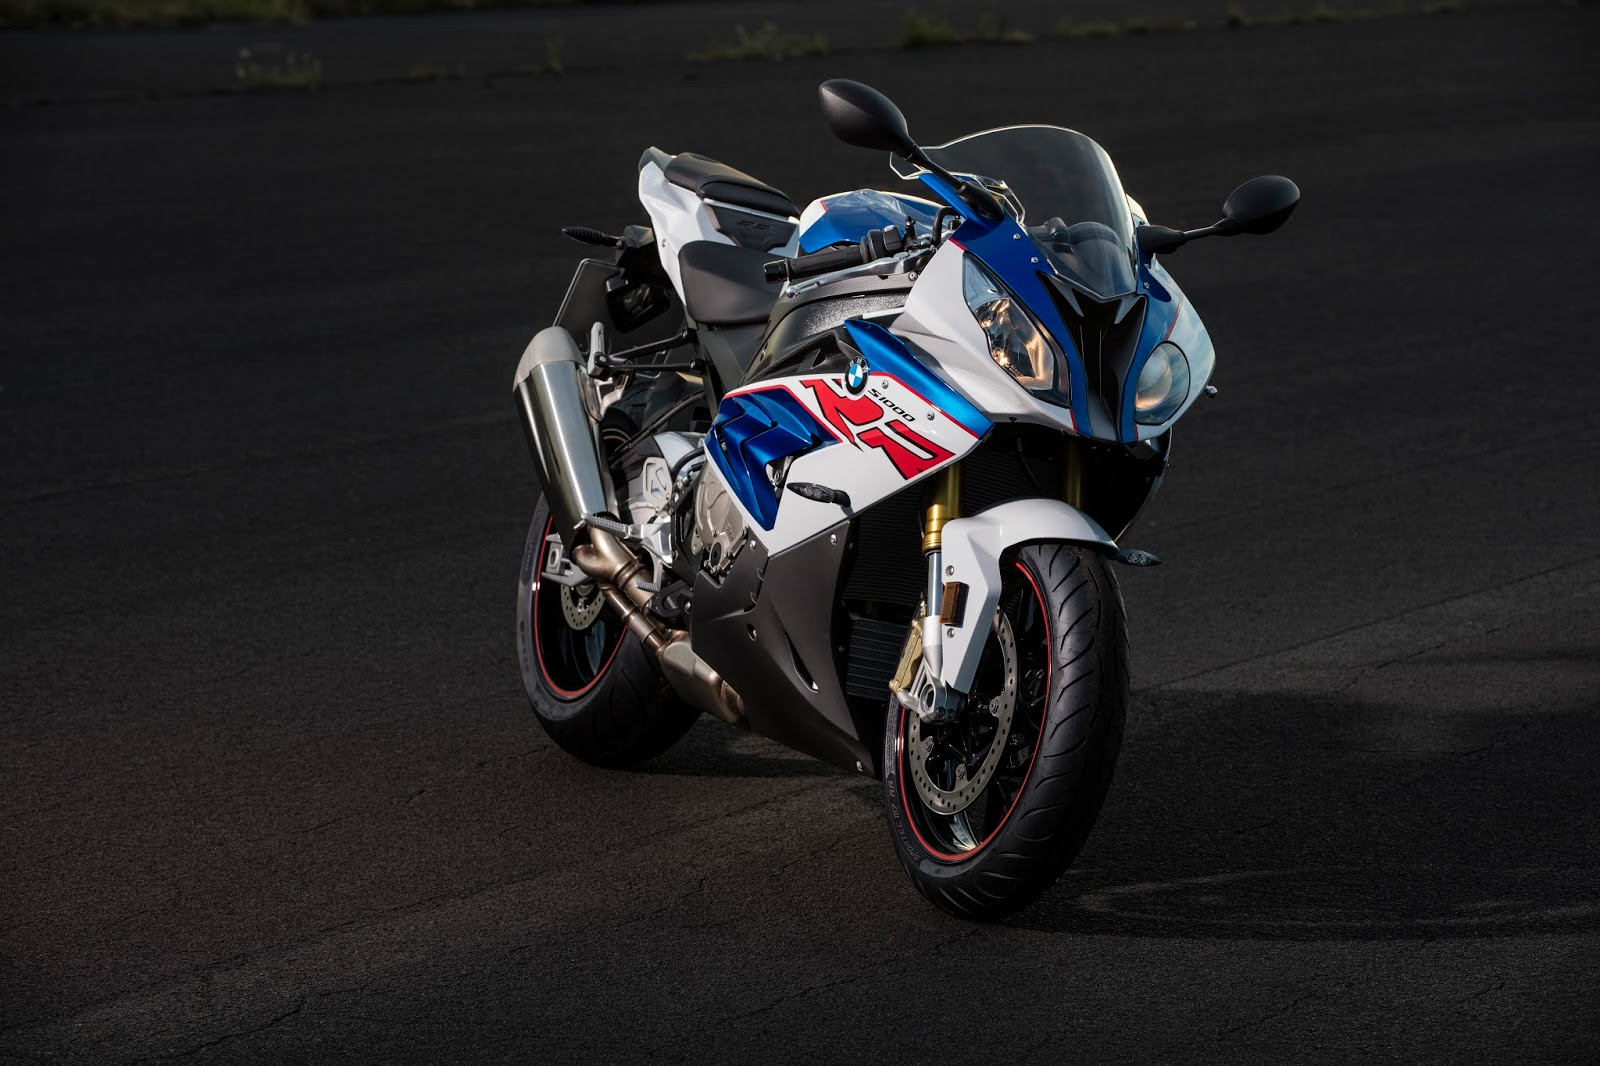 BMW MOTORRAD UK.: EVOLUTION CONTINUES FOR BMW S 1000 R AND S 1000 RR